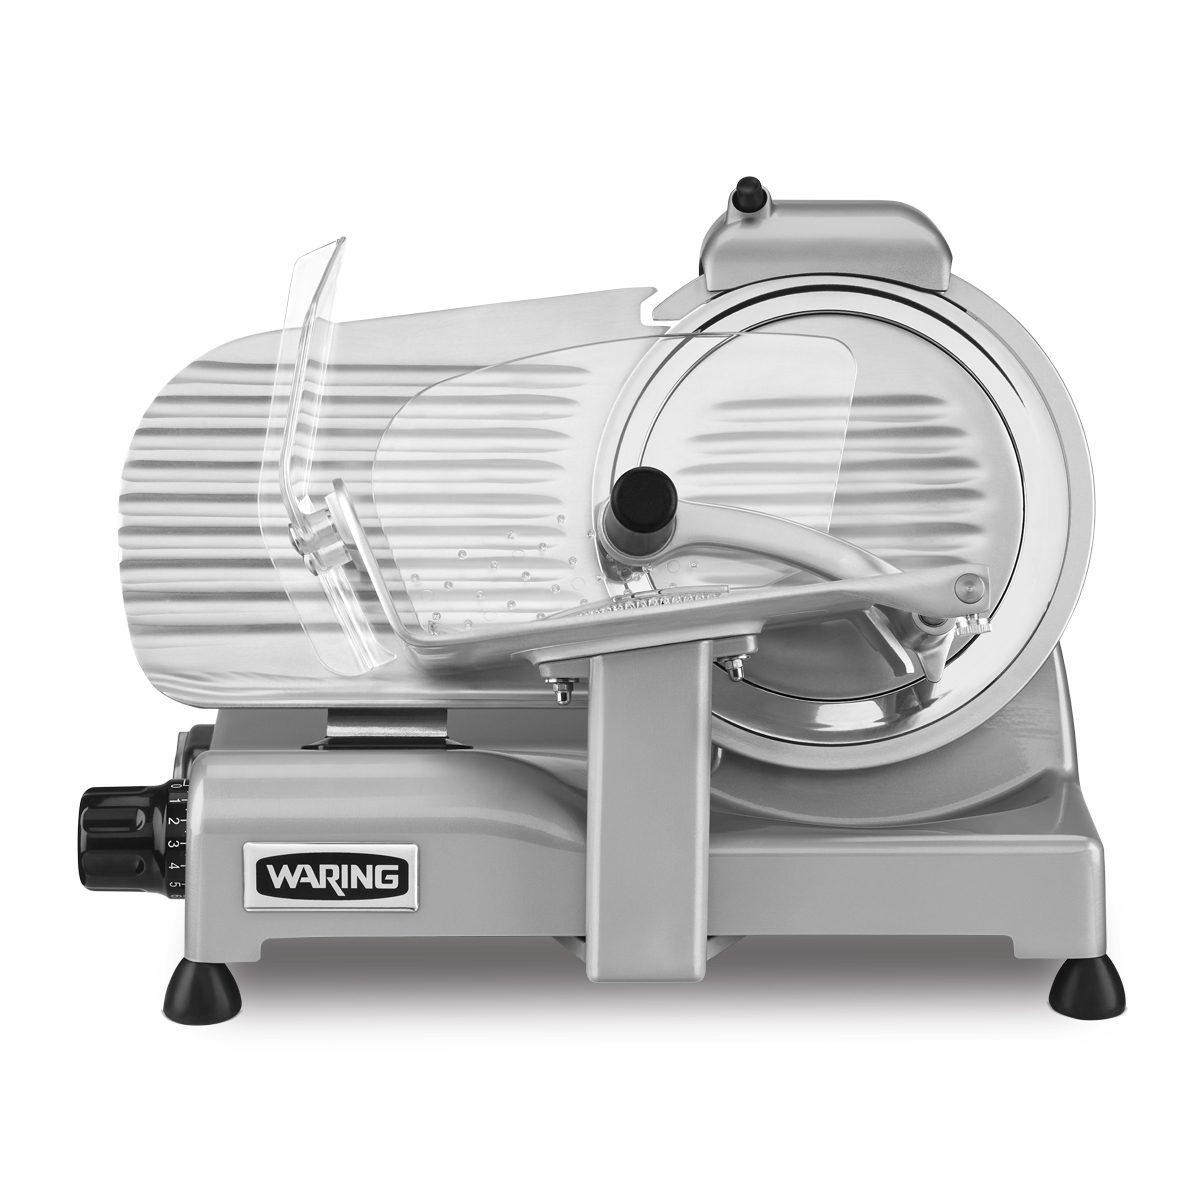 https://www.waringcommercialproducts.com/files/products/wcs220sv-professional-food-slicer-inset-2-1200x1200.jpg